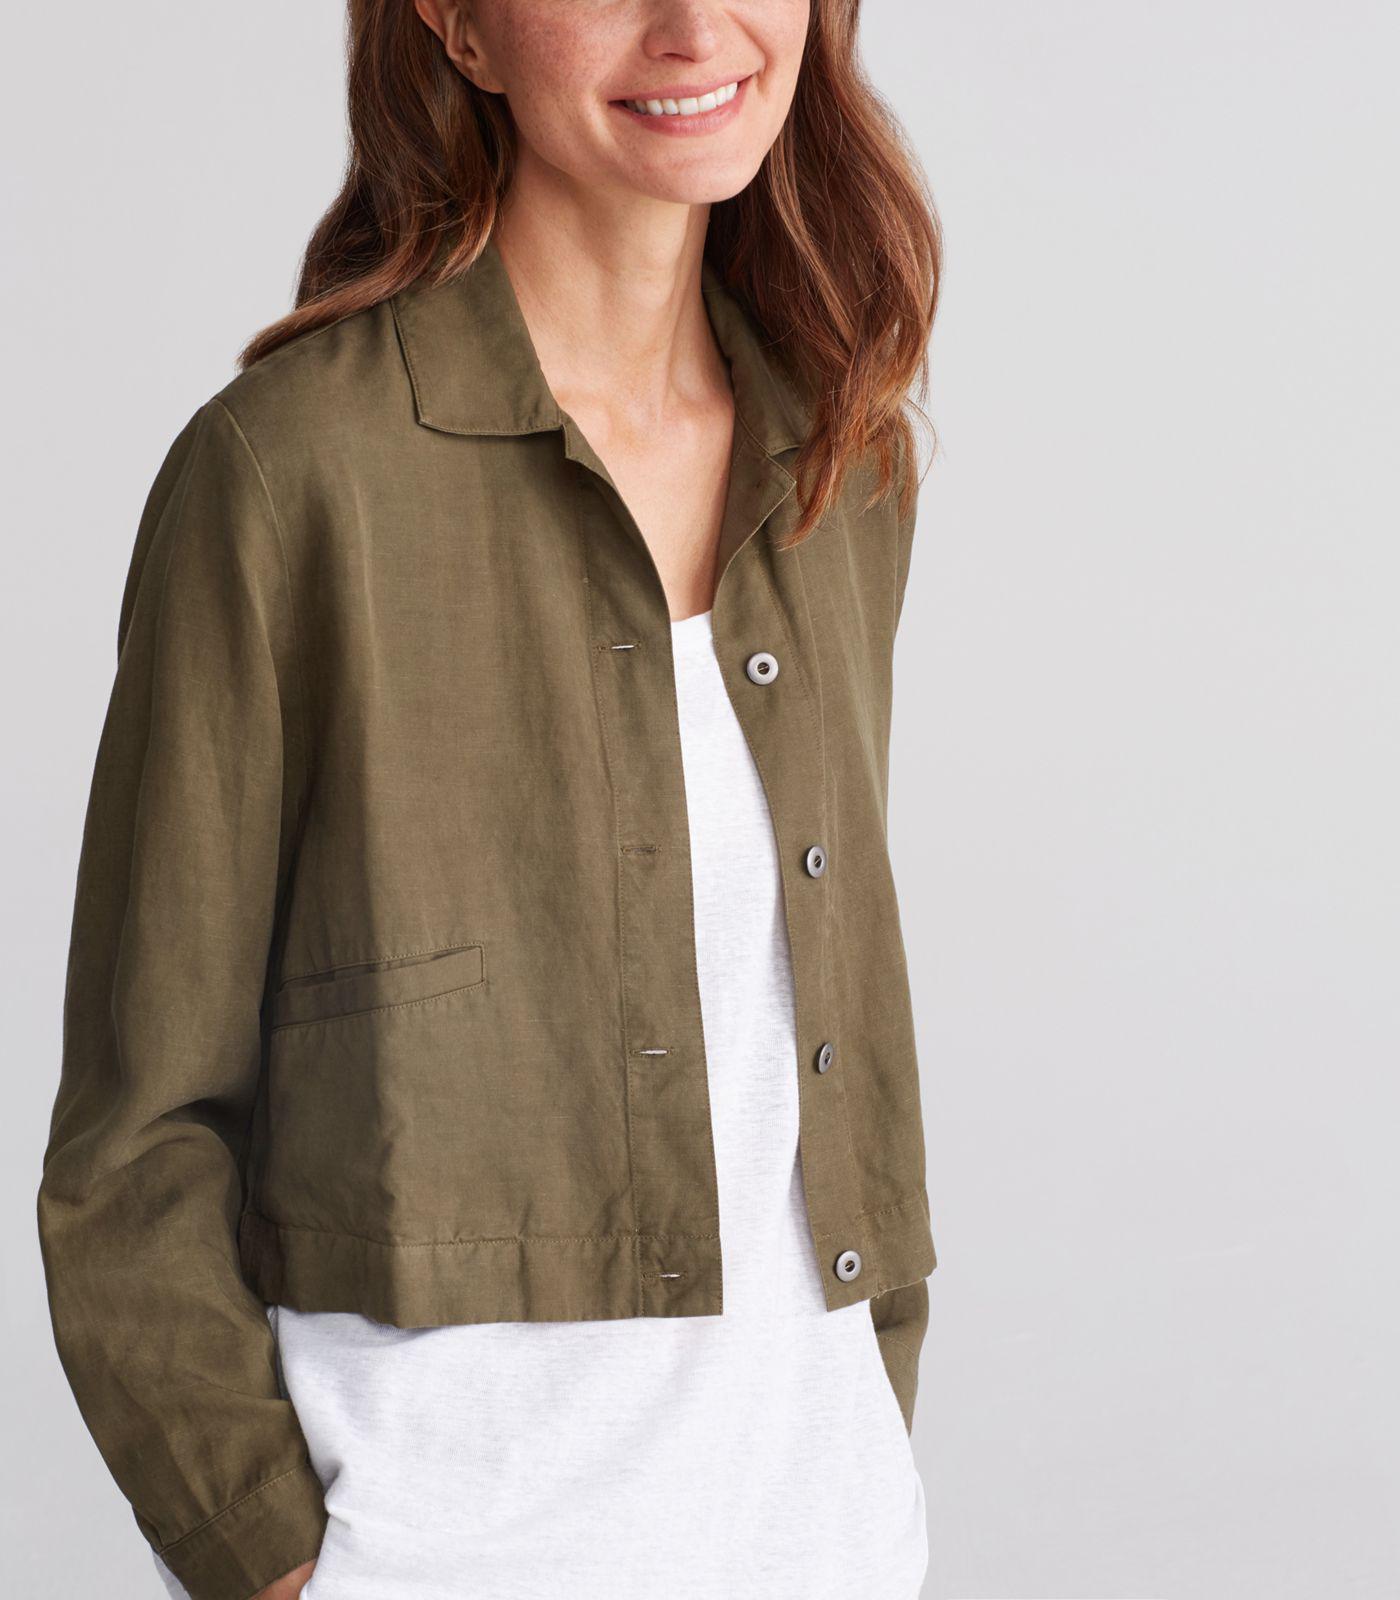 Eileen Fisher Linen Classic Collar Cropped Jacket in Olive (Green) - Lyst